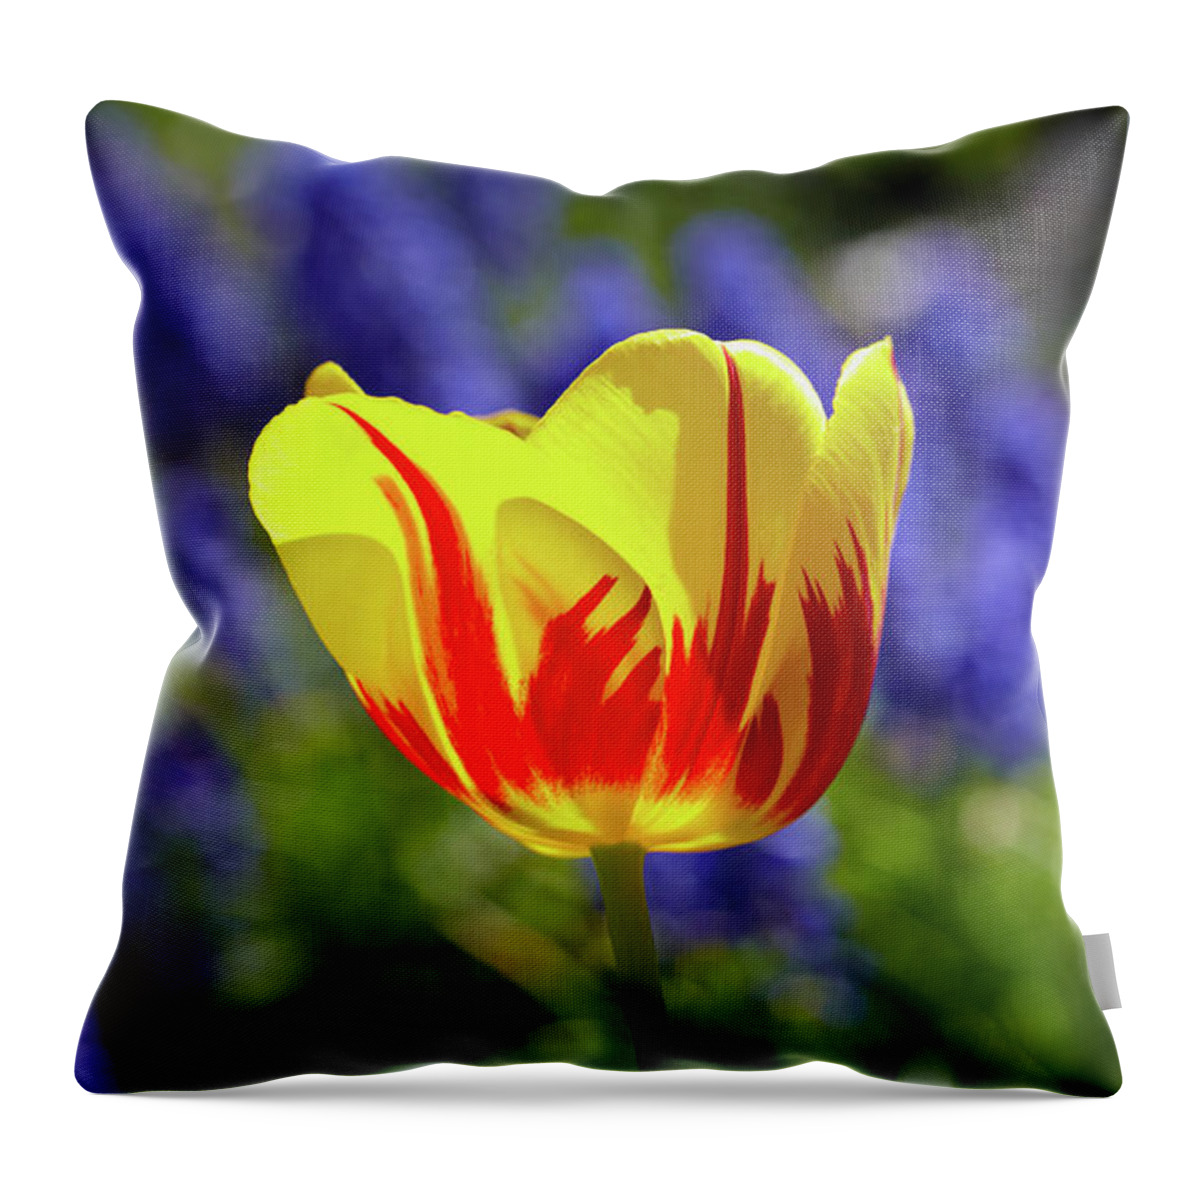 Tulip Throw Pillow featuring the photograph Tulip Flame by Garden Gate magazine